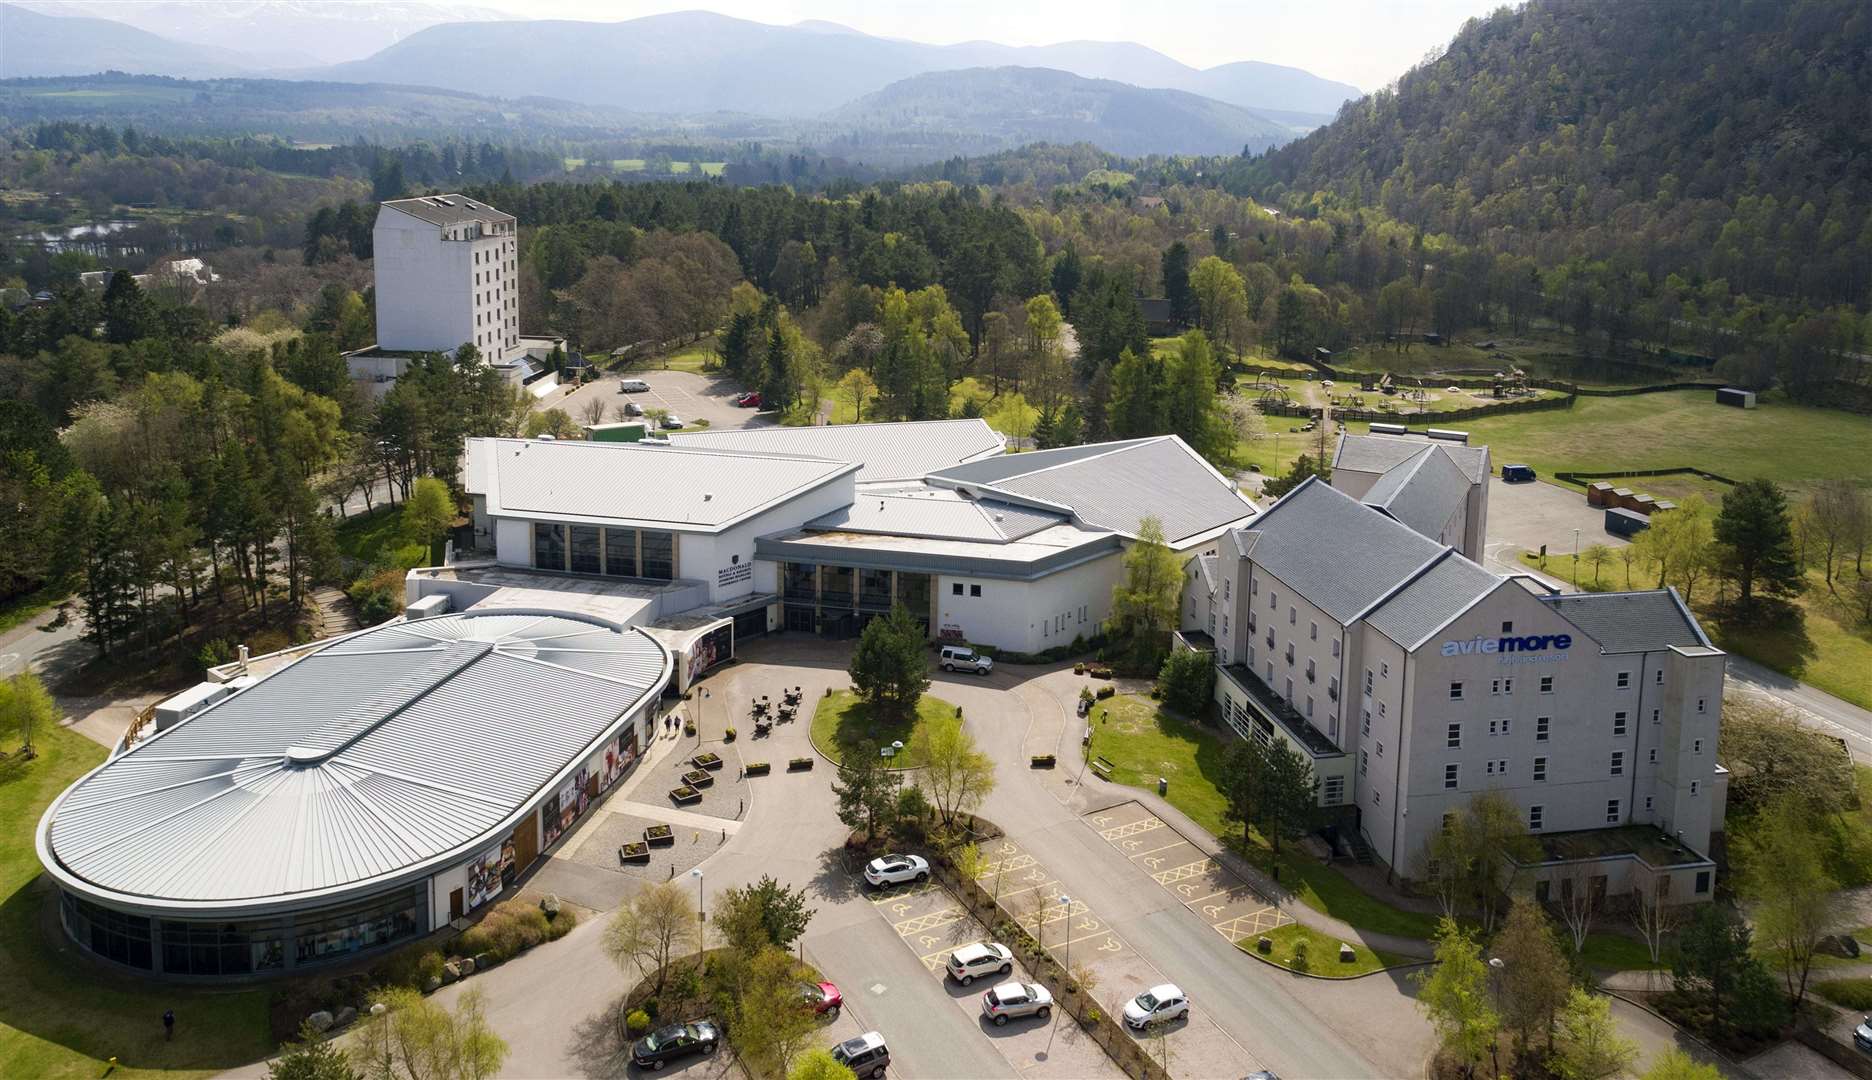 The Macdonald Aviemore Resort has reported a good summer of business so far.